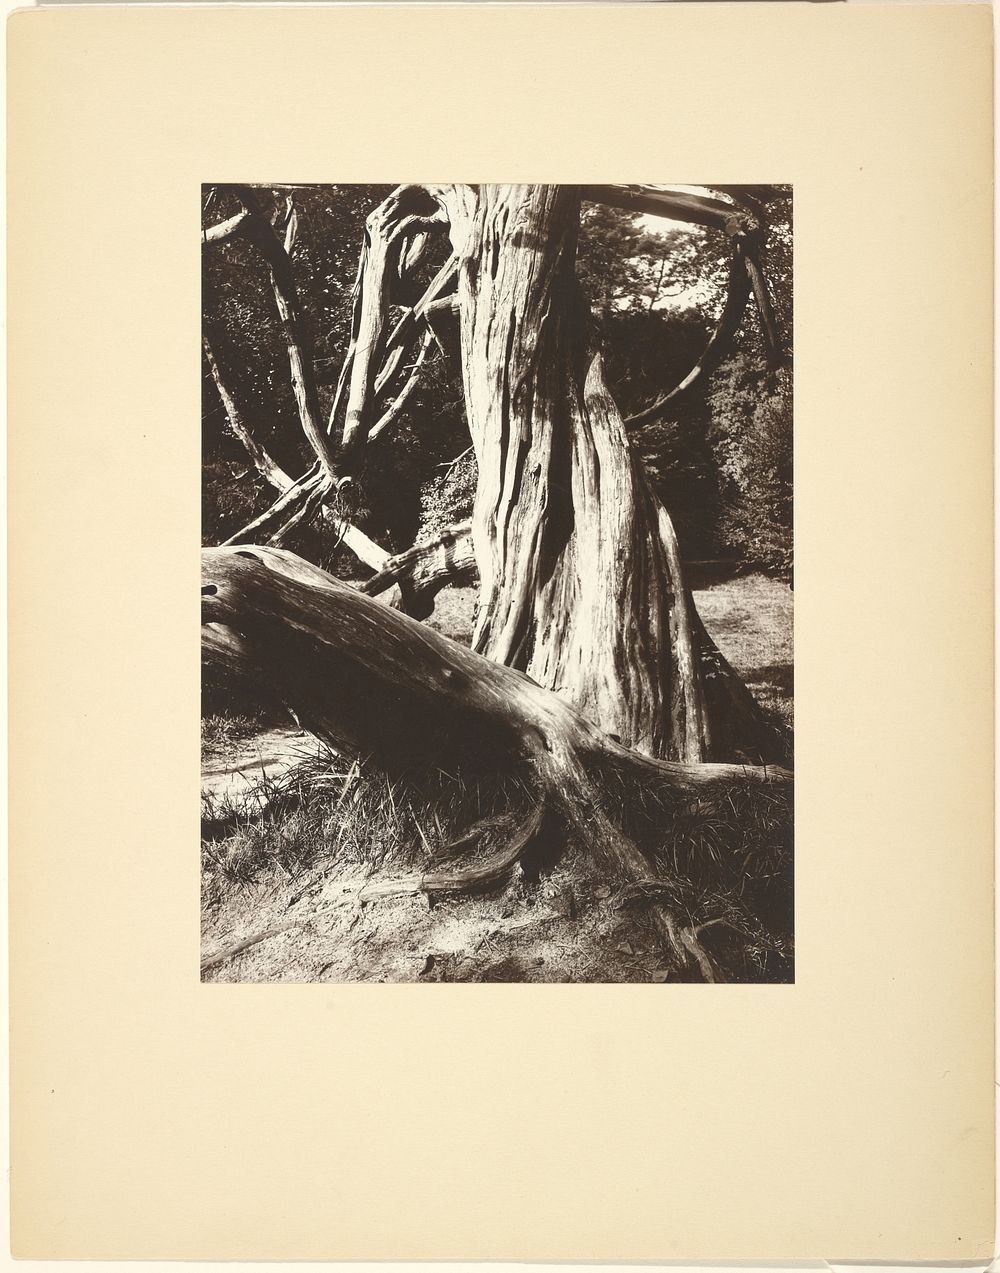 Sapin, Trianon (Pine Tree Trunks at the Trianon) by Eugène Atget